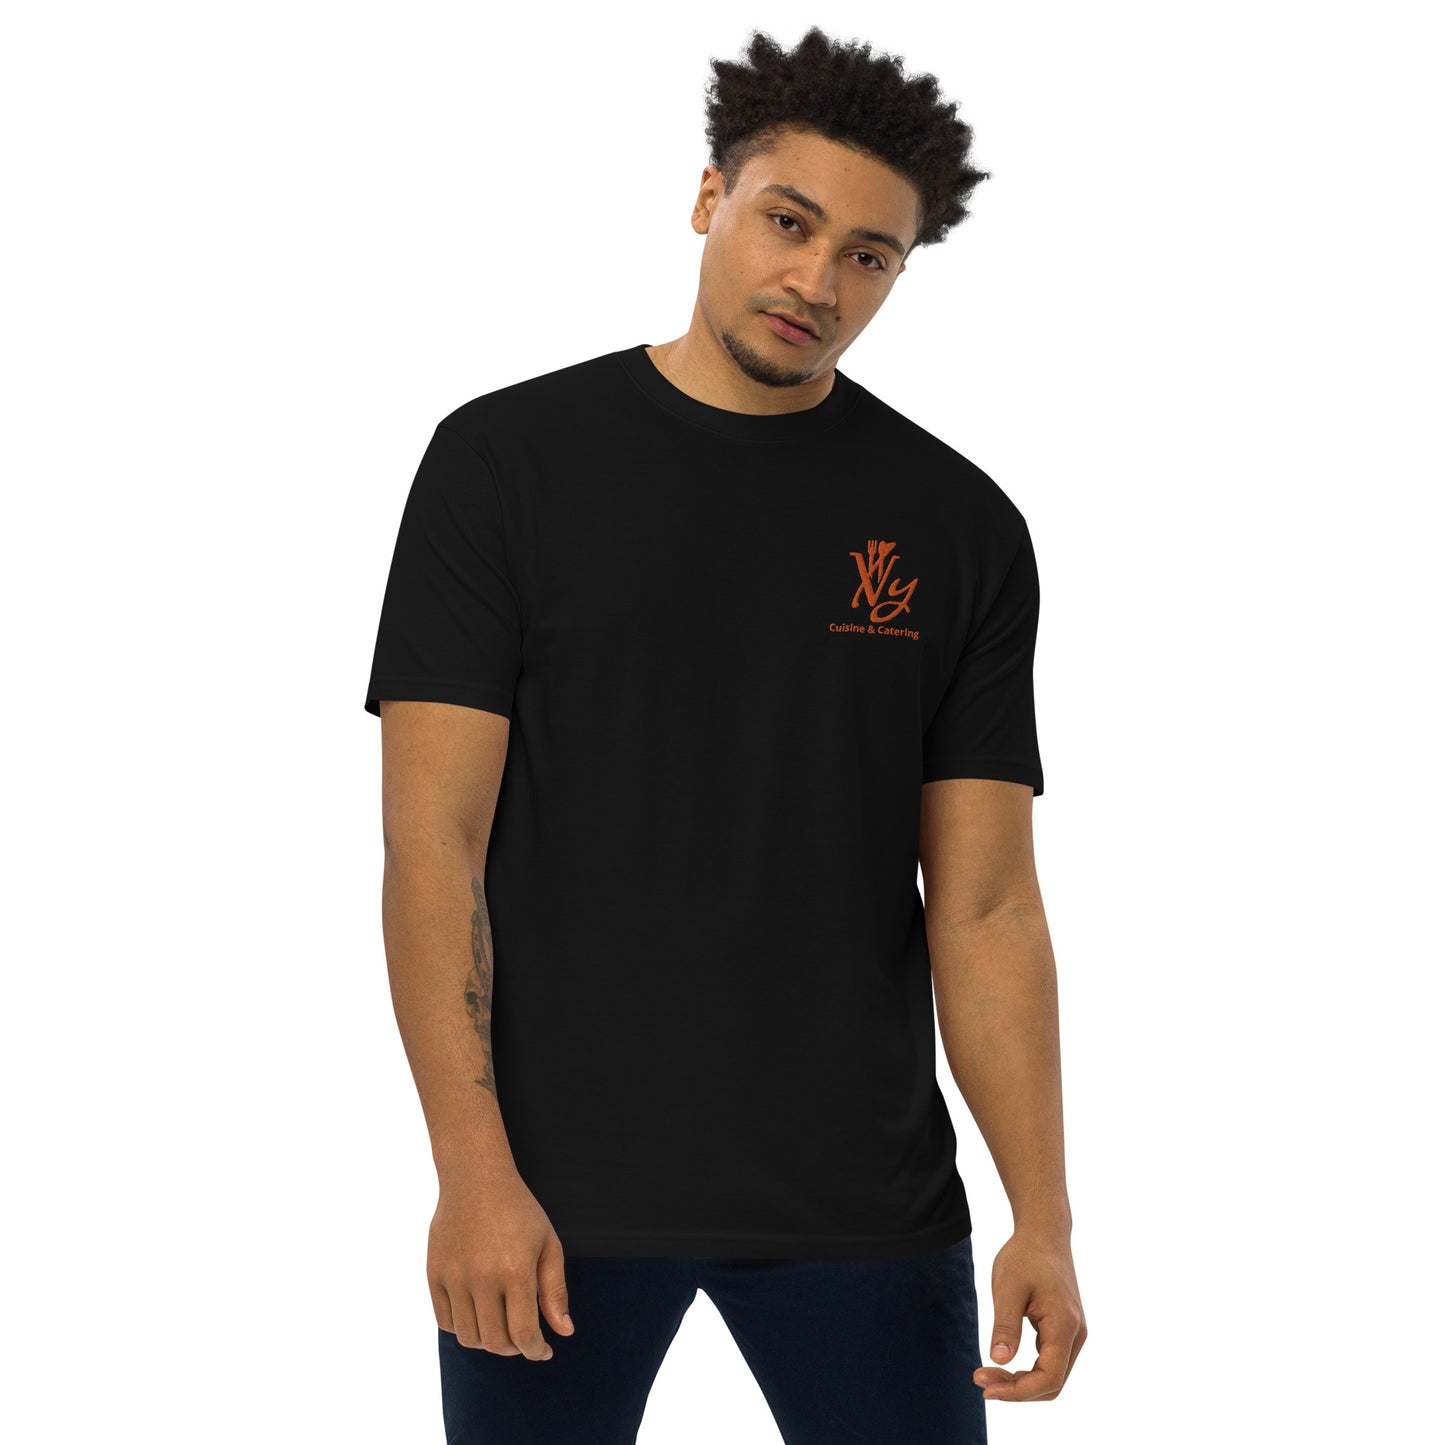 Ivy Cuisine & Catering Men’s premium embroidered heavyweight tee